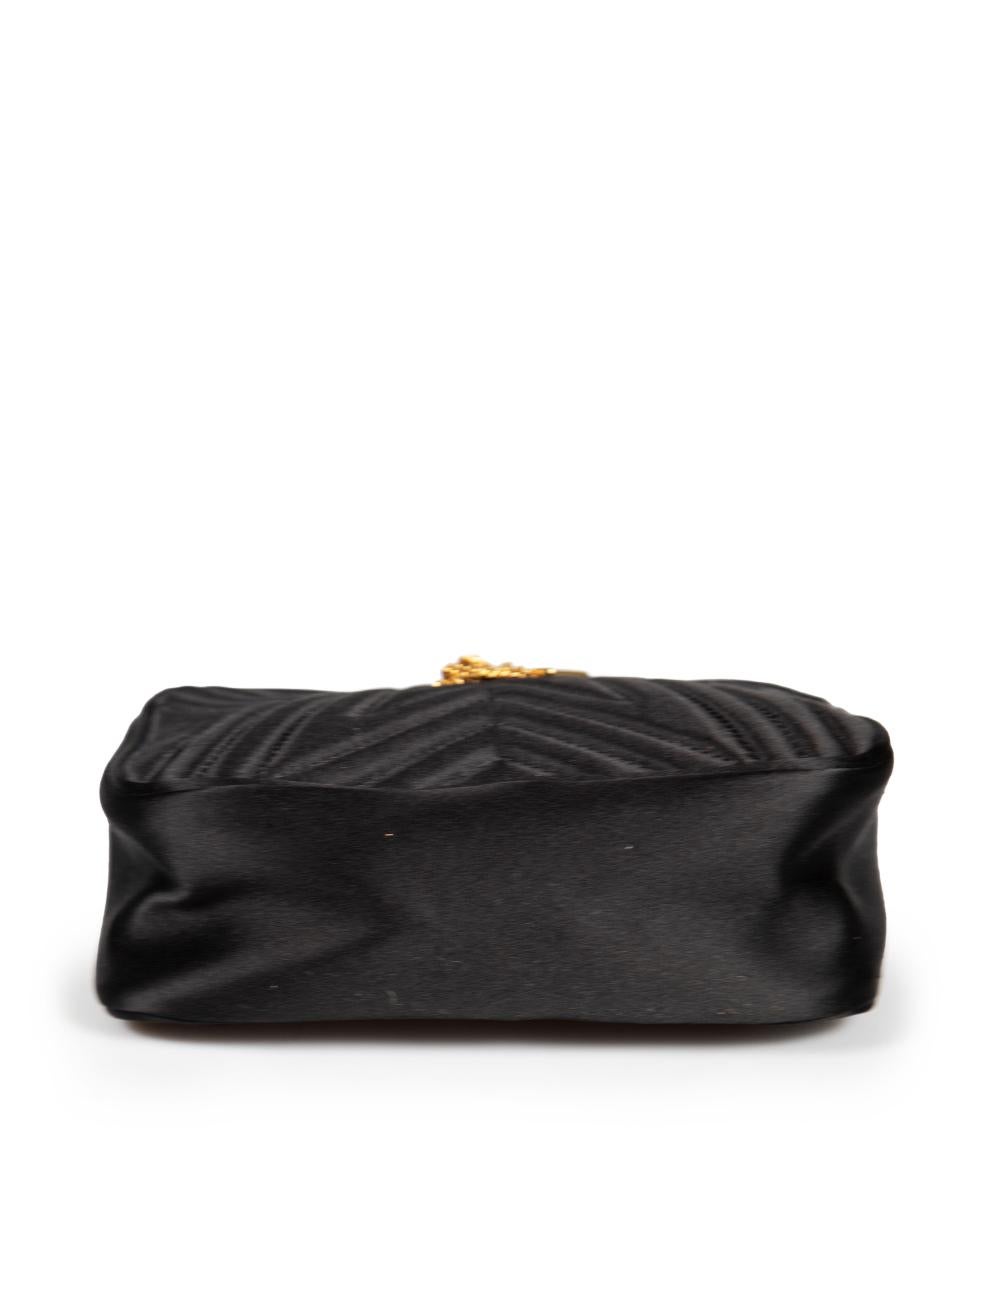 Women's Stella McCartney Black Star Quilted Camera Bag For Sale